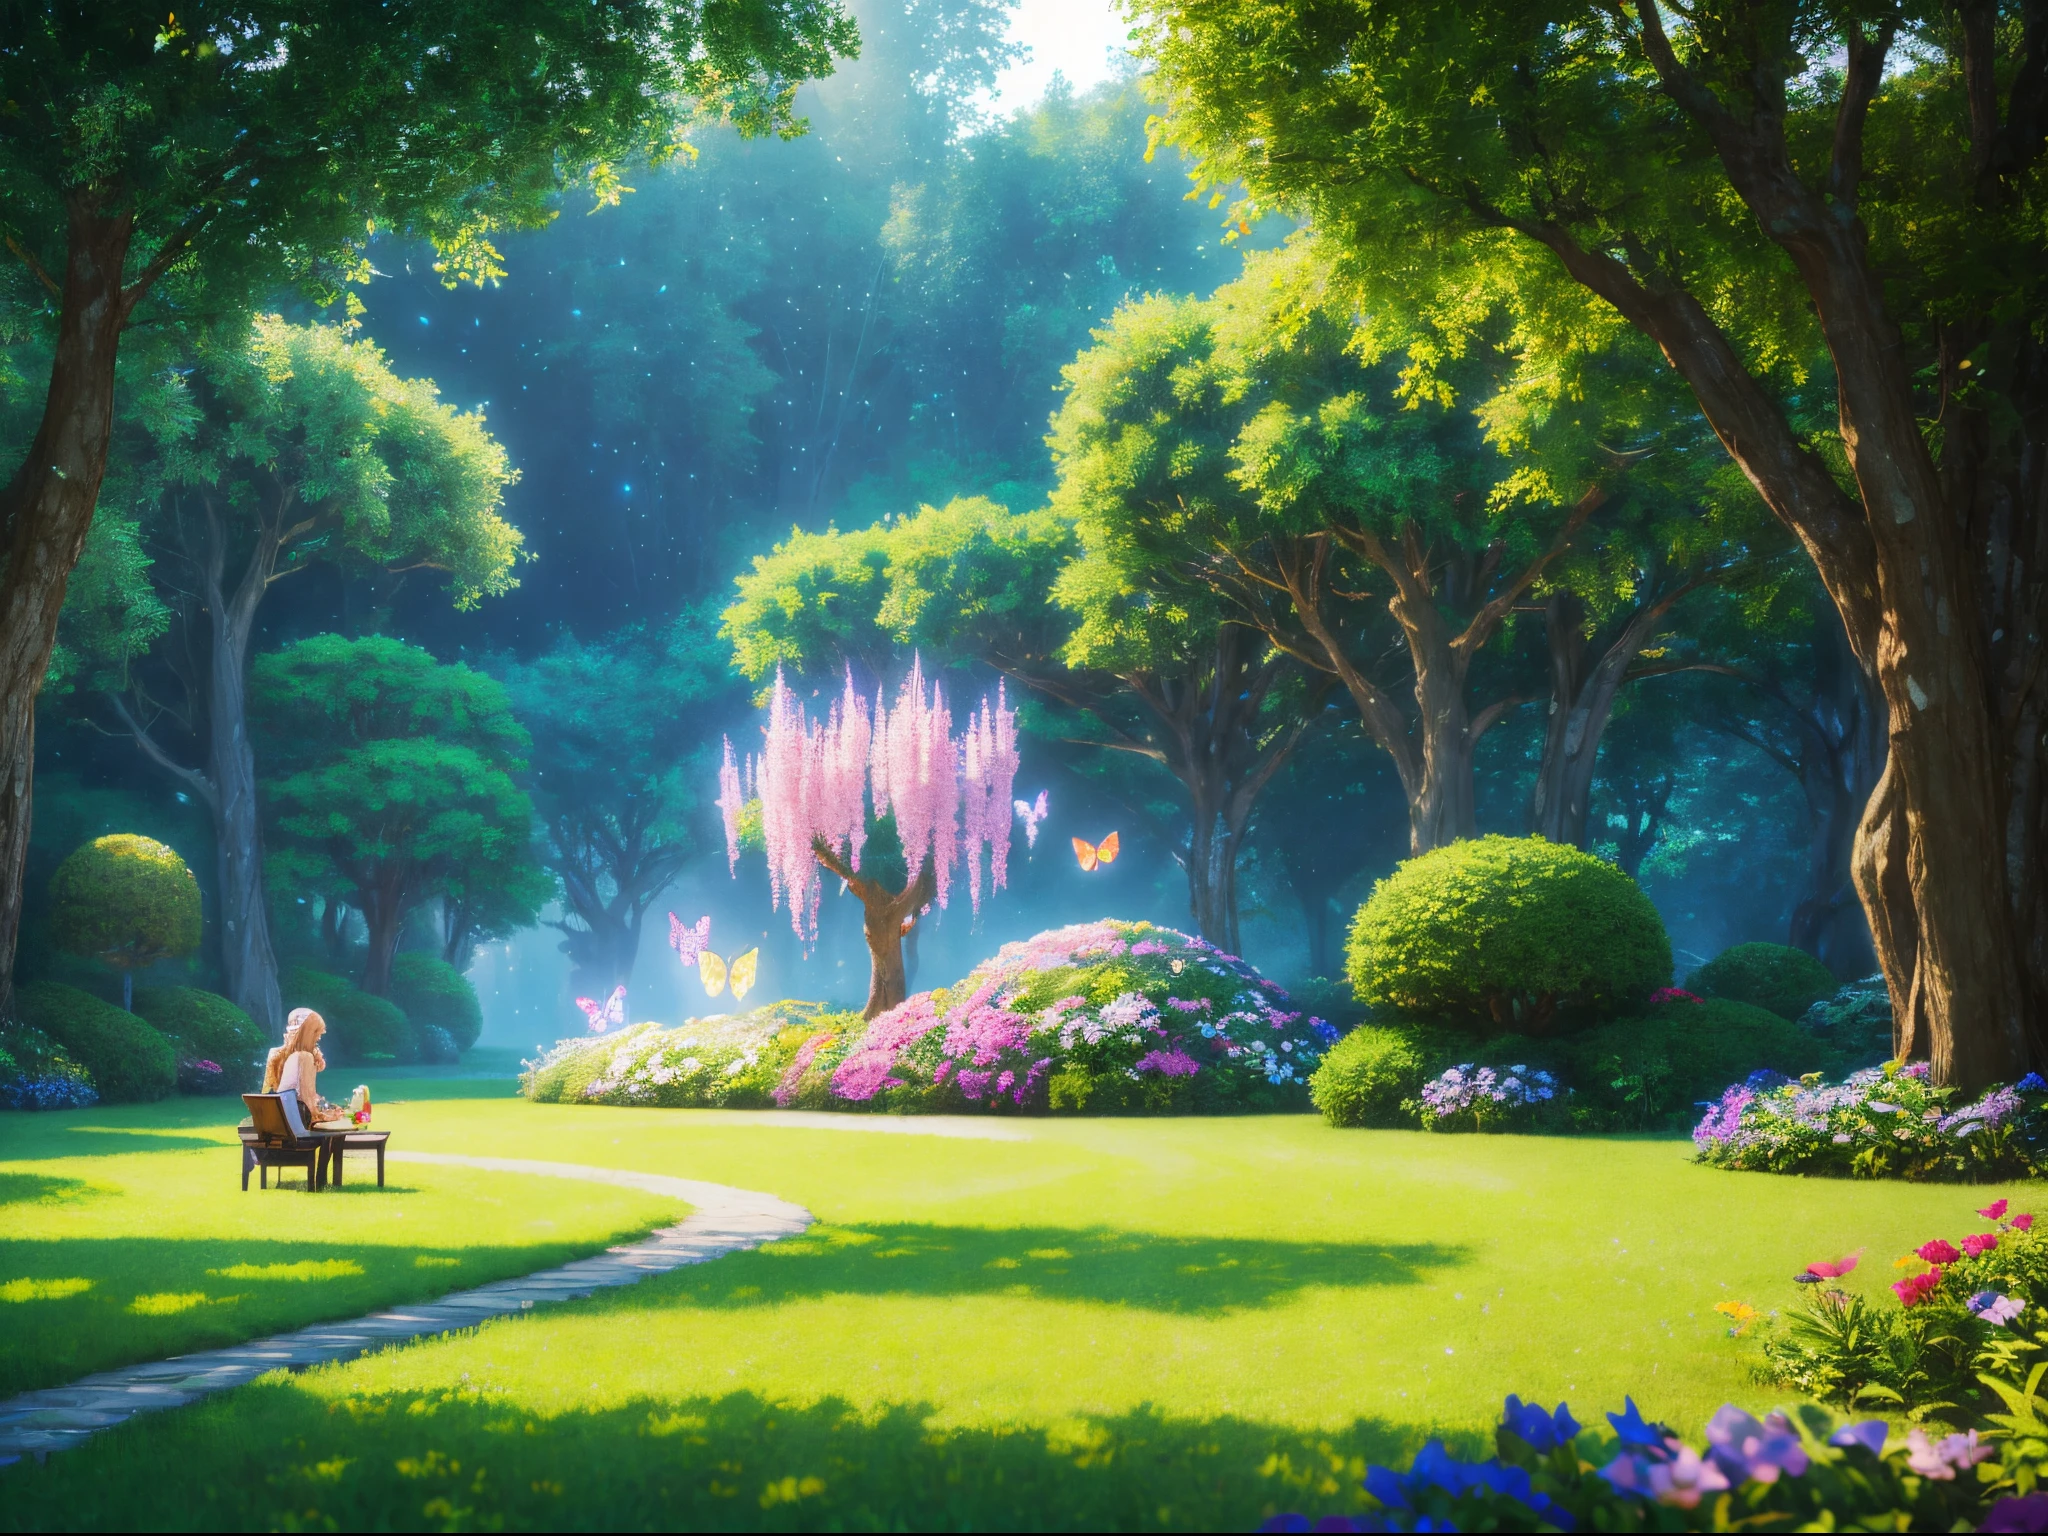 Playfully blend AI and organic elements in a whimsical landscape, featuring robotic butterflies pollinating pixelated flowers and quirky talking trees. (best quality,4k,highres,masterpiece:1.2),ultra-detailed,realistic:1.37,illustration,imaginative scene,enchanted forest,playful atmosphere,vibrant colors,pixie dust,ethereal lighting,soft pastel tones,fantasy art,mosaic textures,happy AIs,technology meets nature,harmonious blend of digital and natural beauty,toy-like trees,talkative and animated foliage,digital insects,futuristic garden,electronic butterflies,magical ambiance,delicate pollination process,whimsical details,organic and technological fusion,emerging pixels,harmony of artificial and organic life,colorful garden of tomorrow,animated robotic butterflies,pixel art flowers,joyful and lively scenery,magical landscape with a twist,robotic creatures in a natural setting,twinkling lights and interactive nature,juxtaposition of realism and technology. enormous 